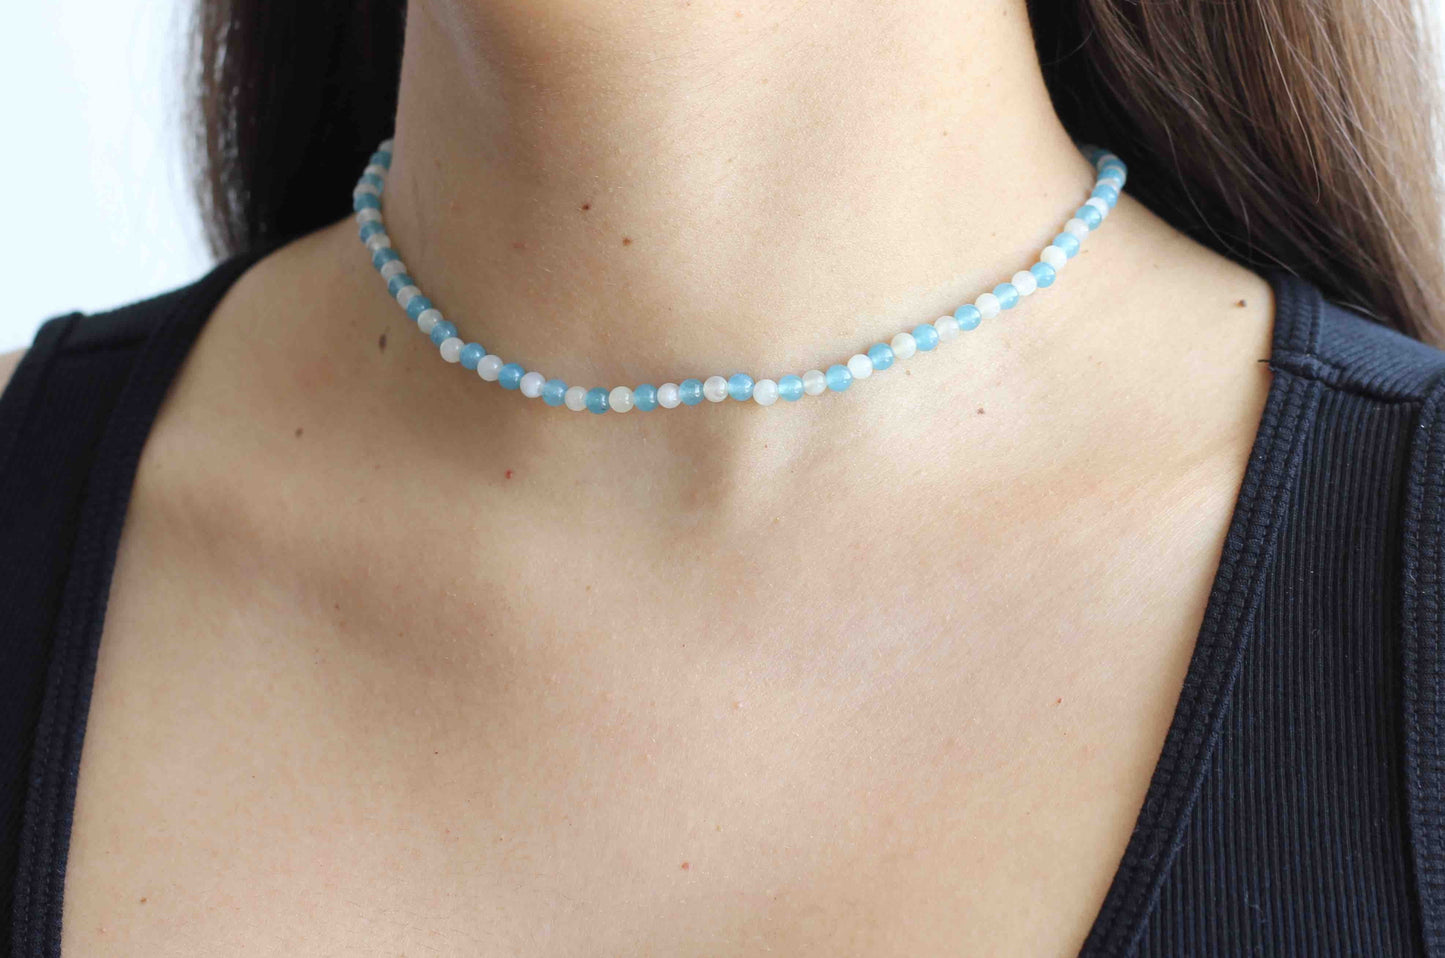 Handmade Minimalist Blue Quartz and White Moonstone Beaded Gemstone Choker Necklace with Sterling Silver Closure